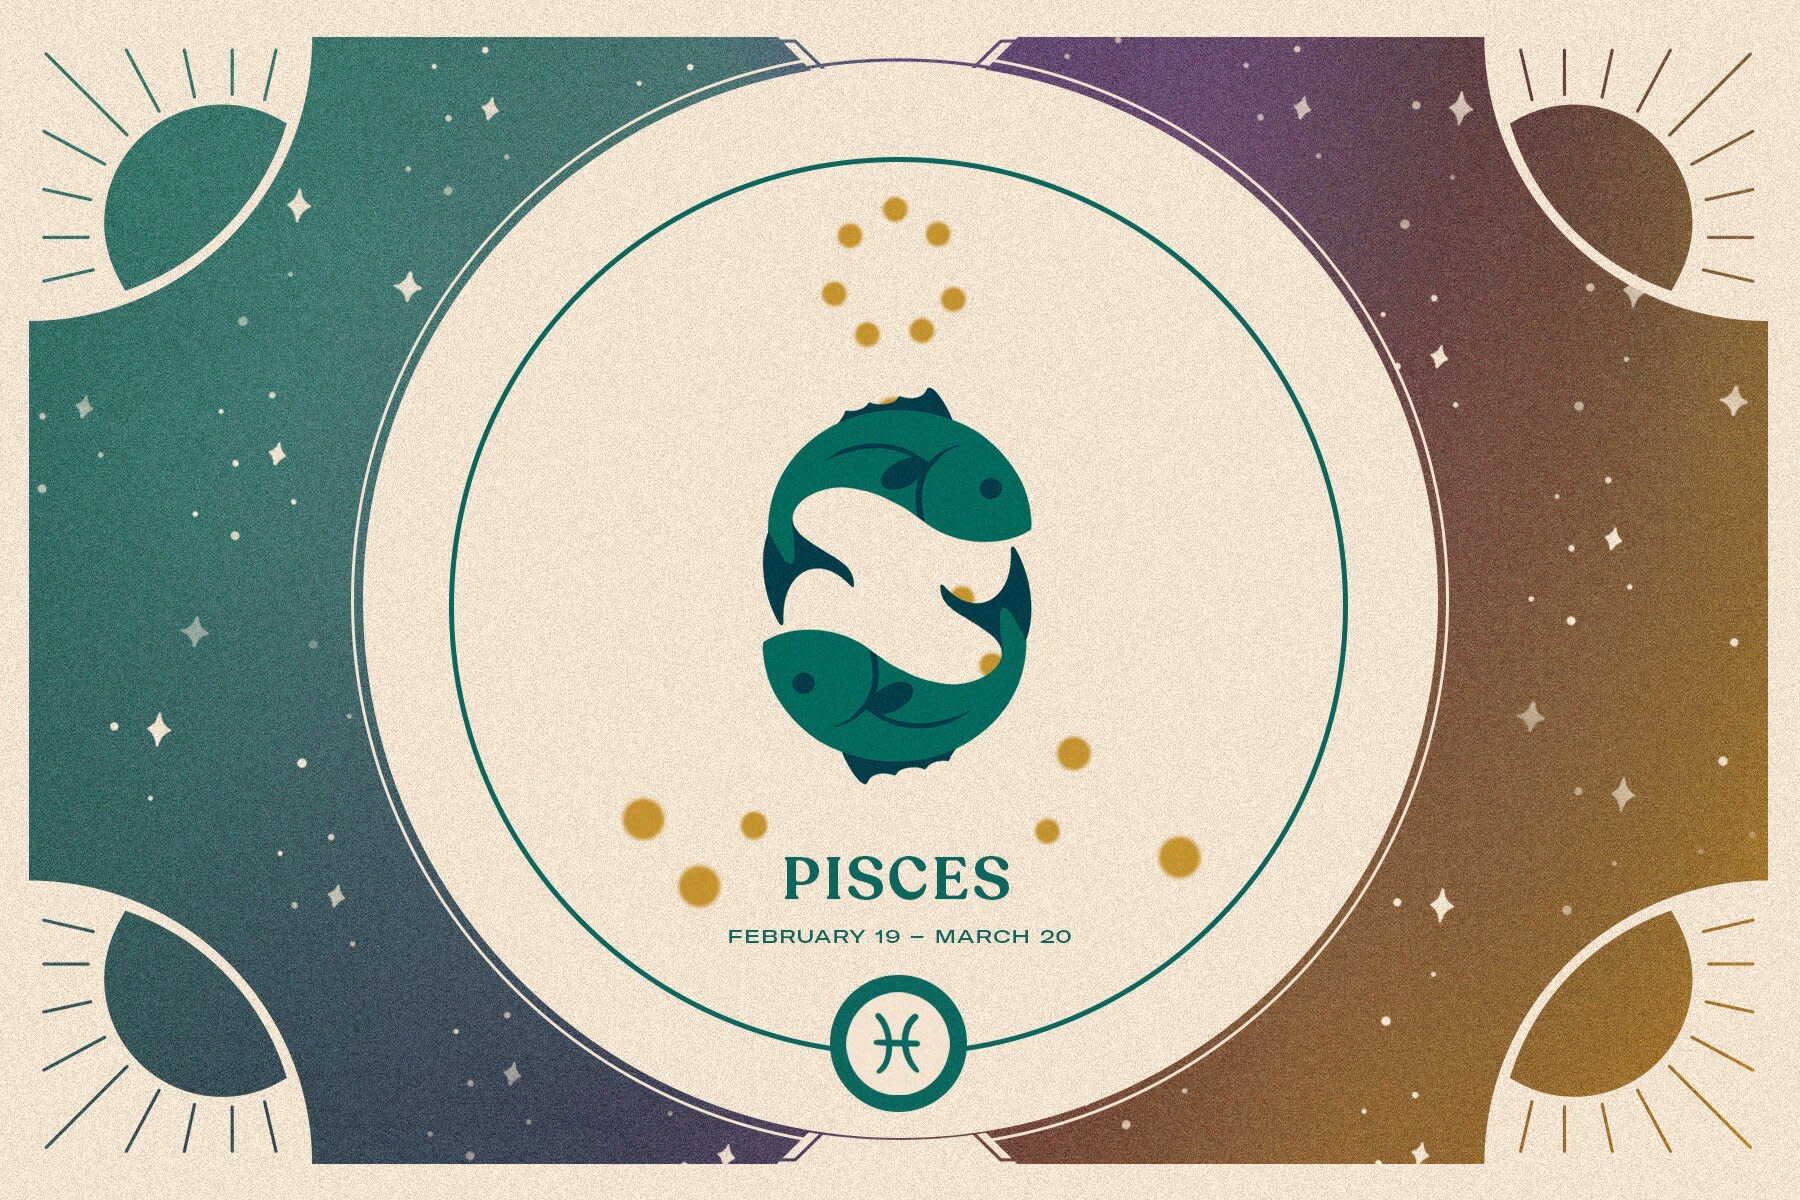 Everything you need to know if your zodiac sign is Pisces